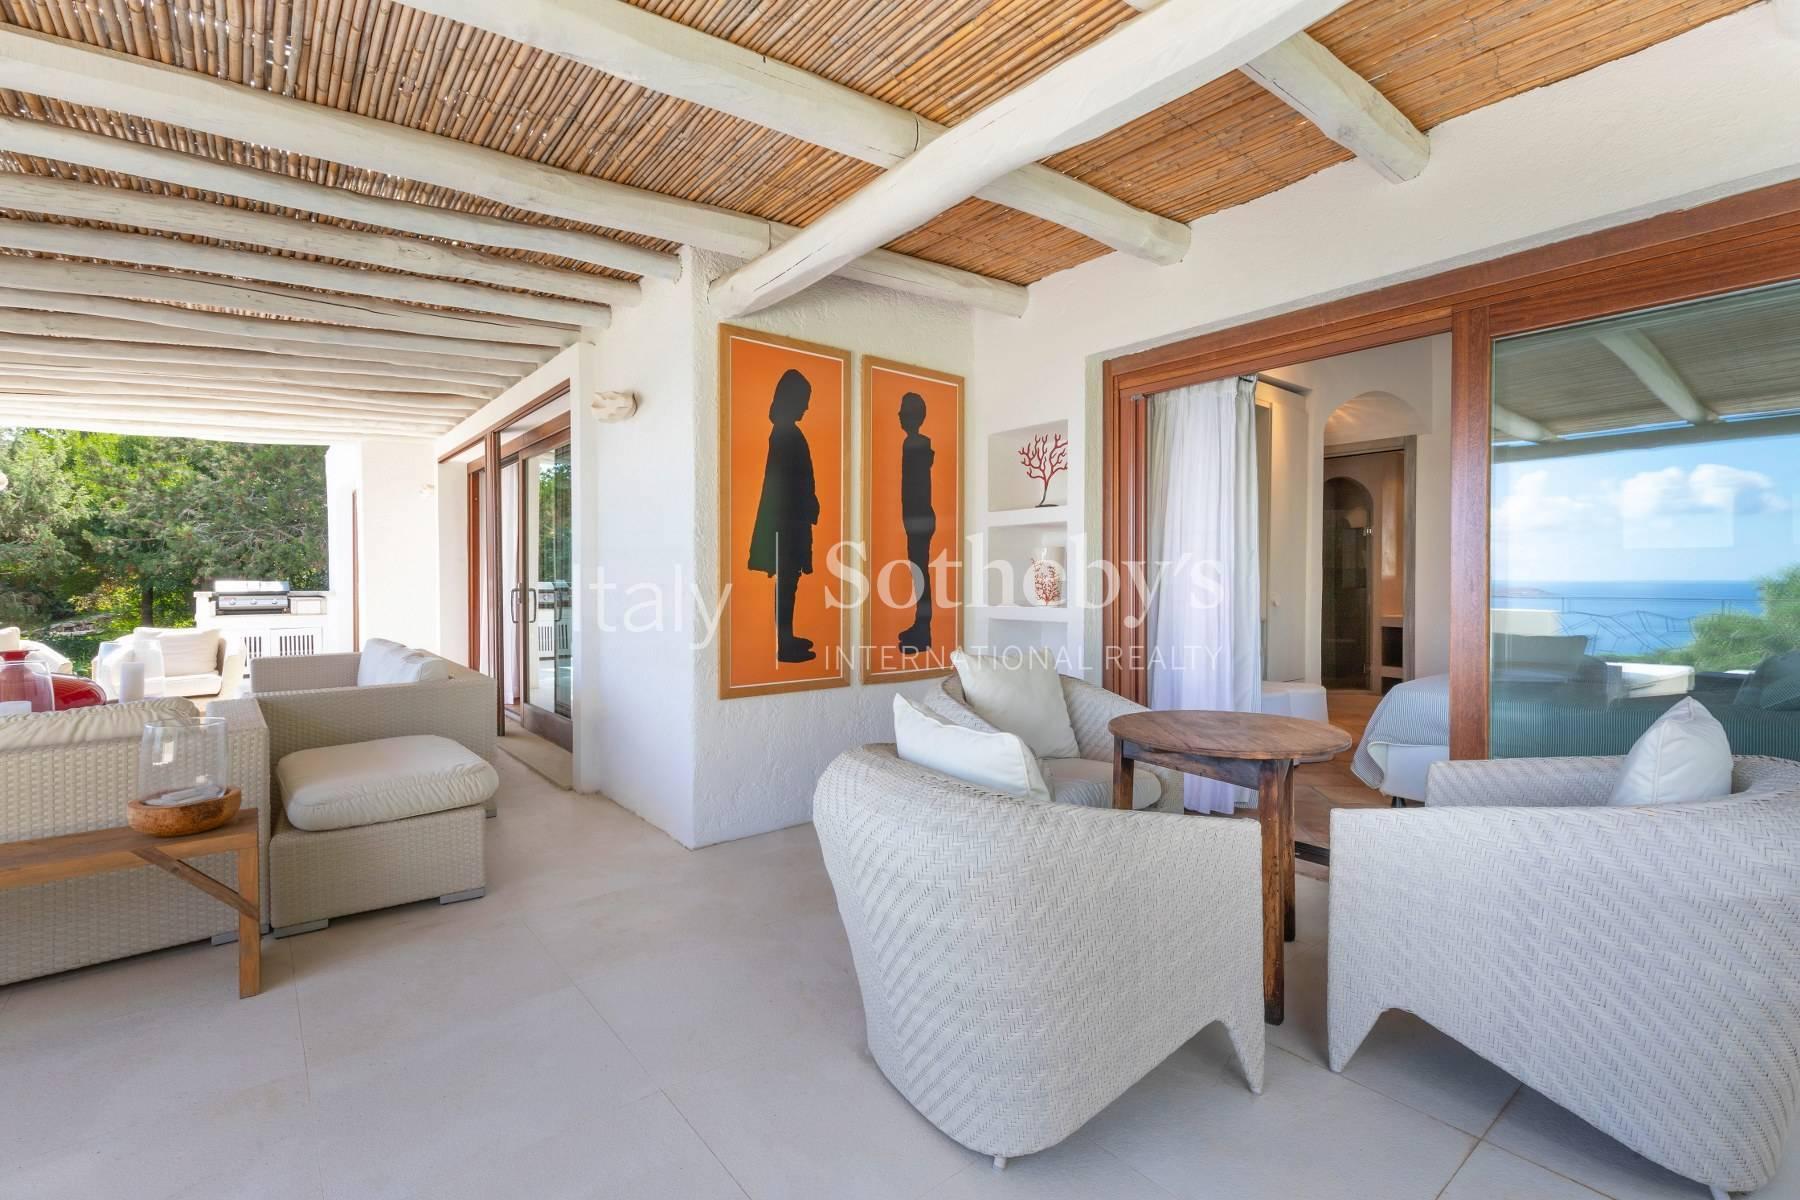 Seaview independent villa in the hill of Pantogia - 3